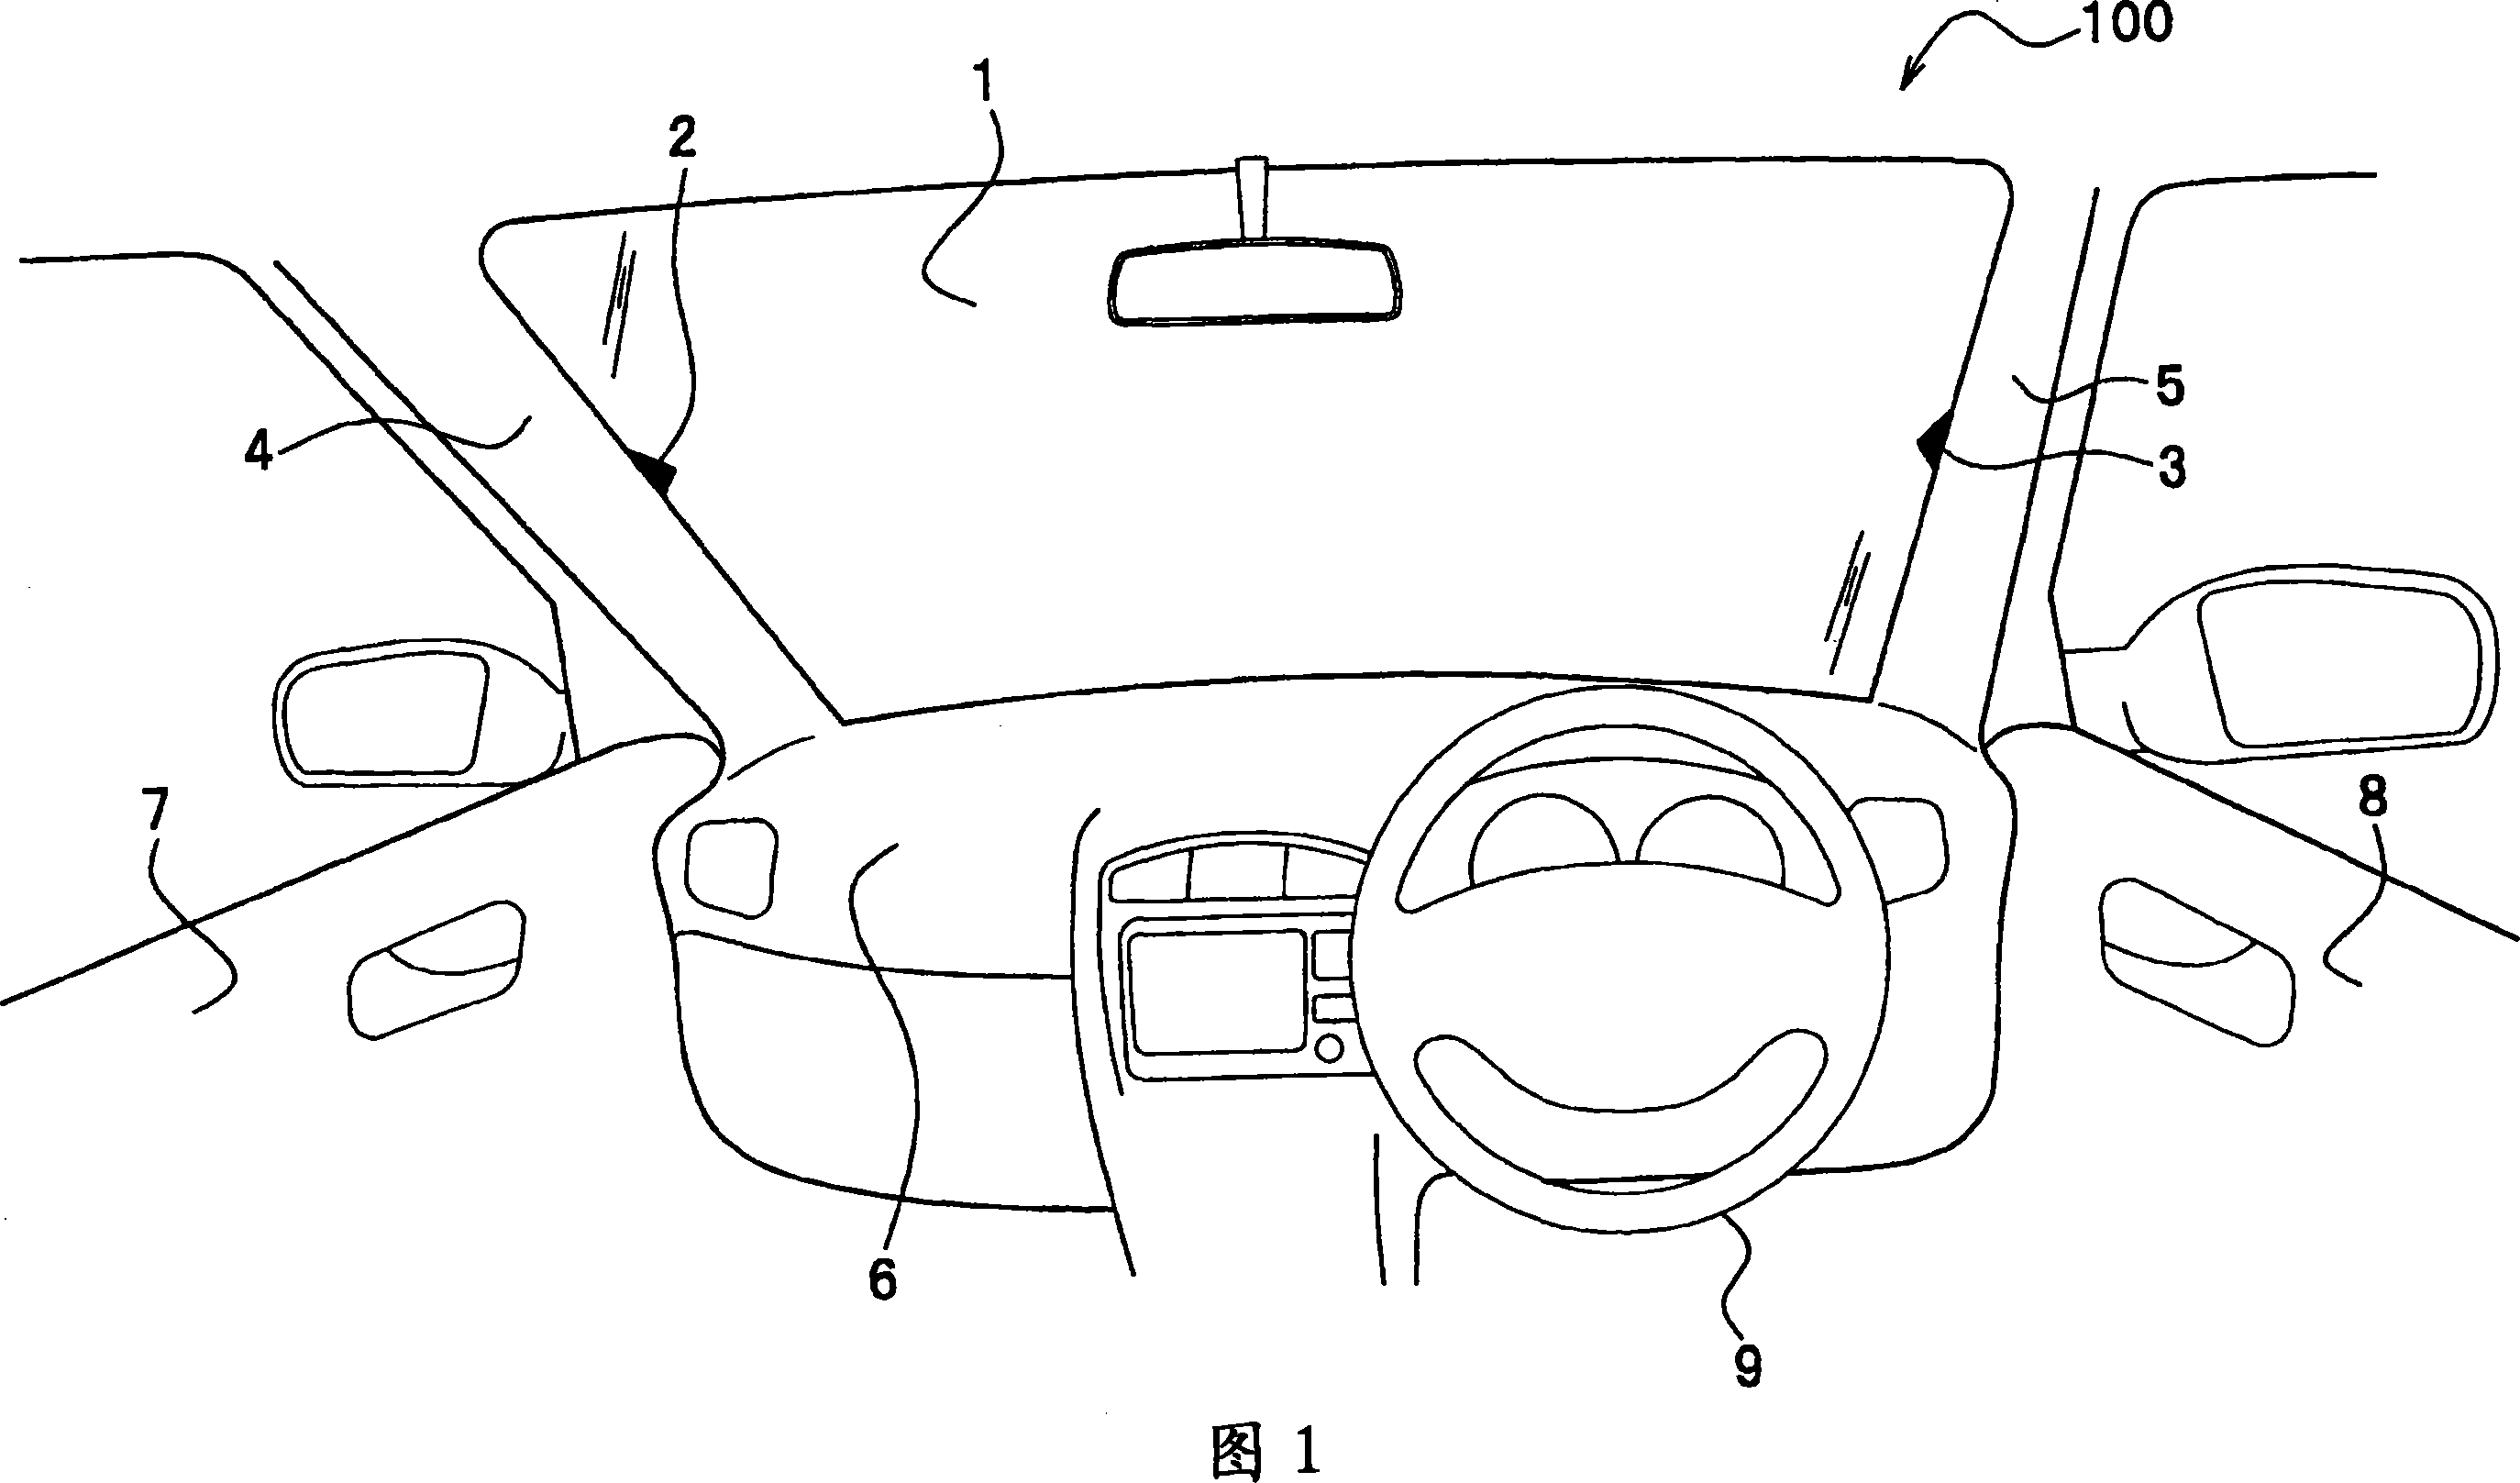 Front window shield for vehicle